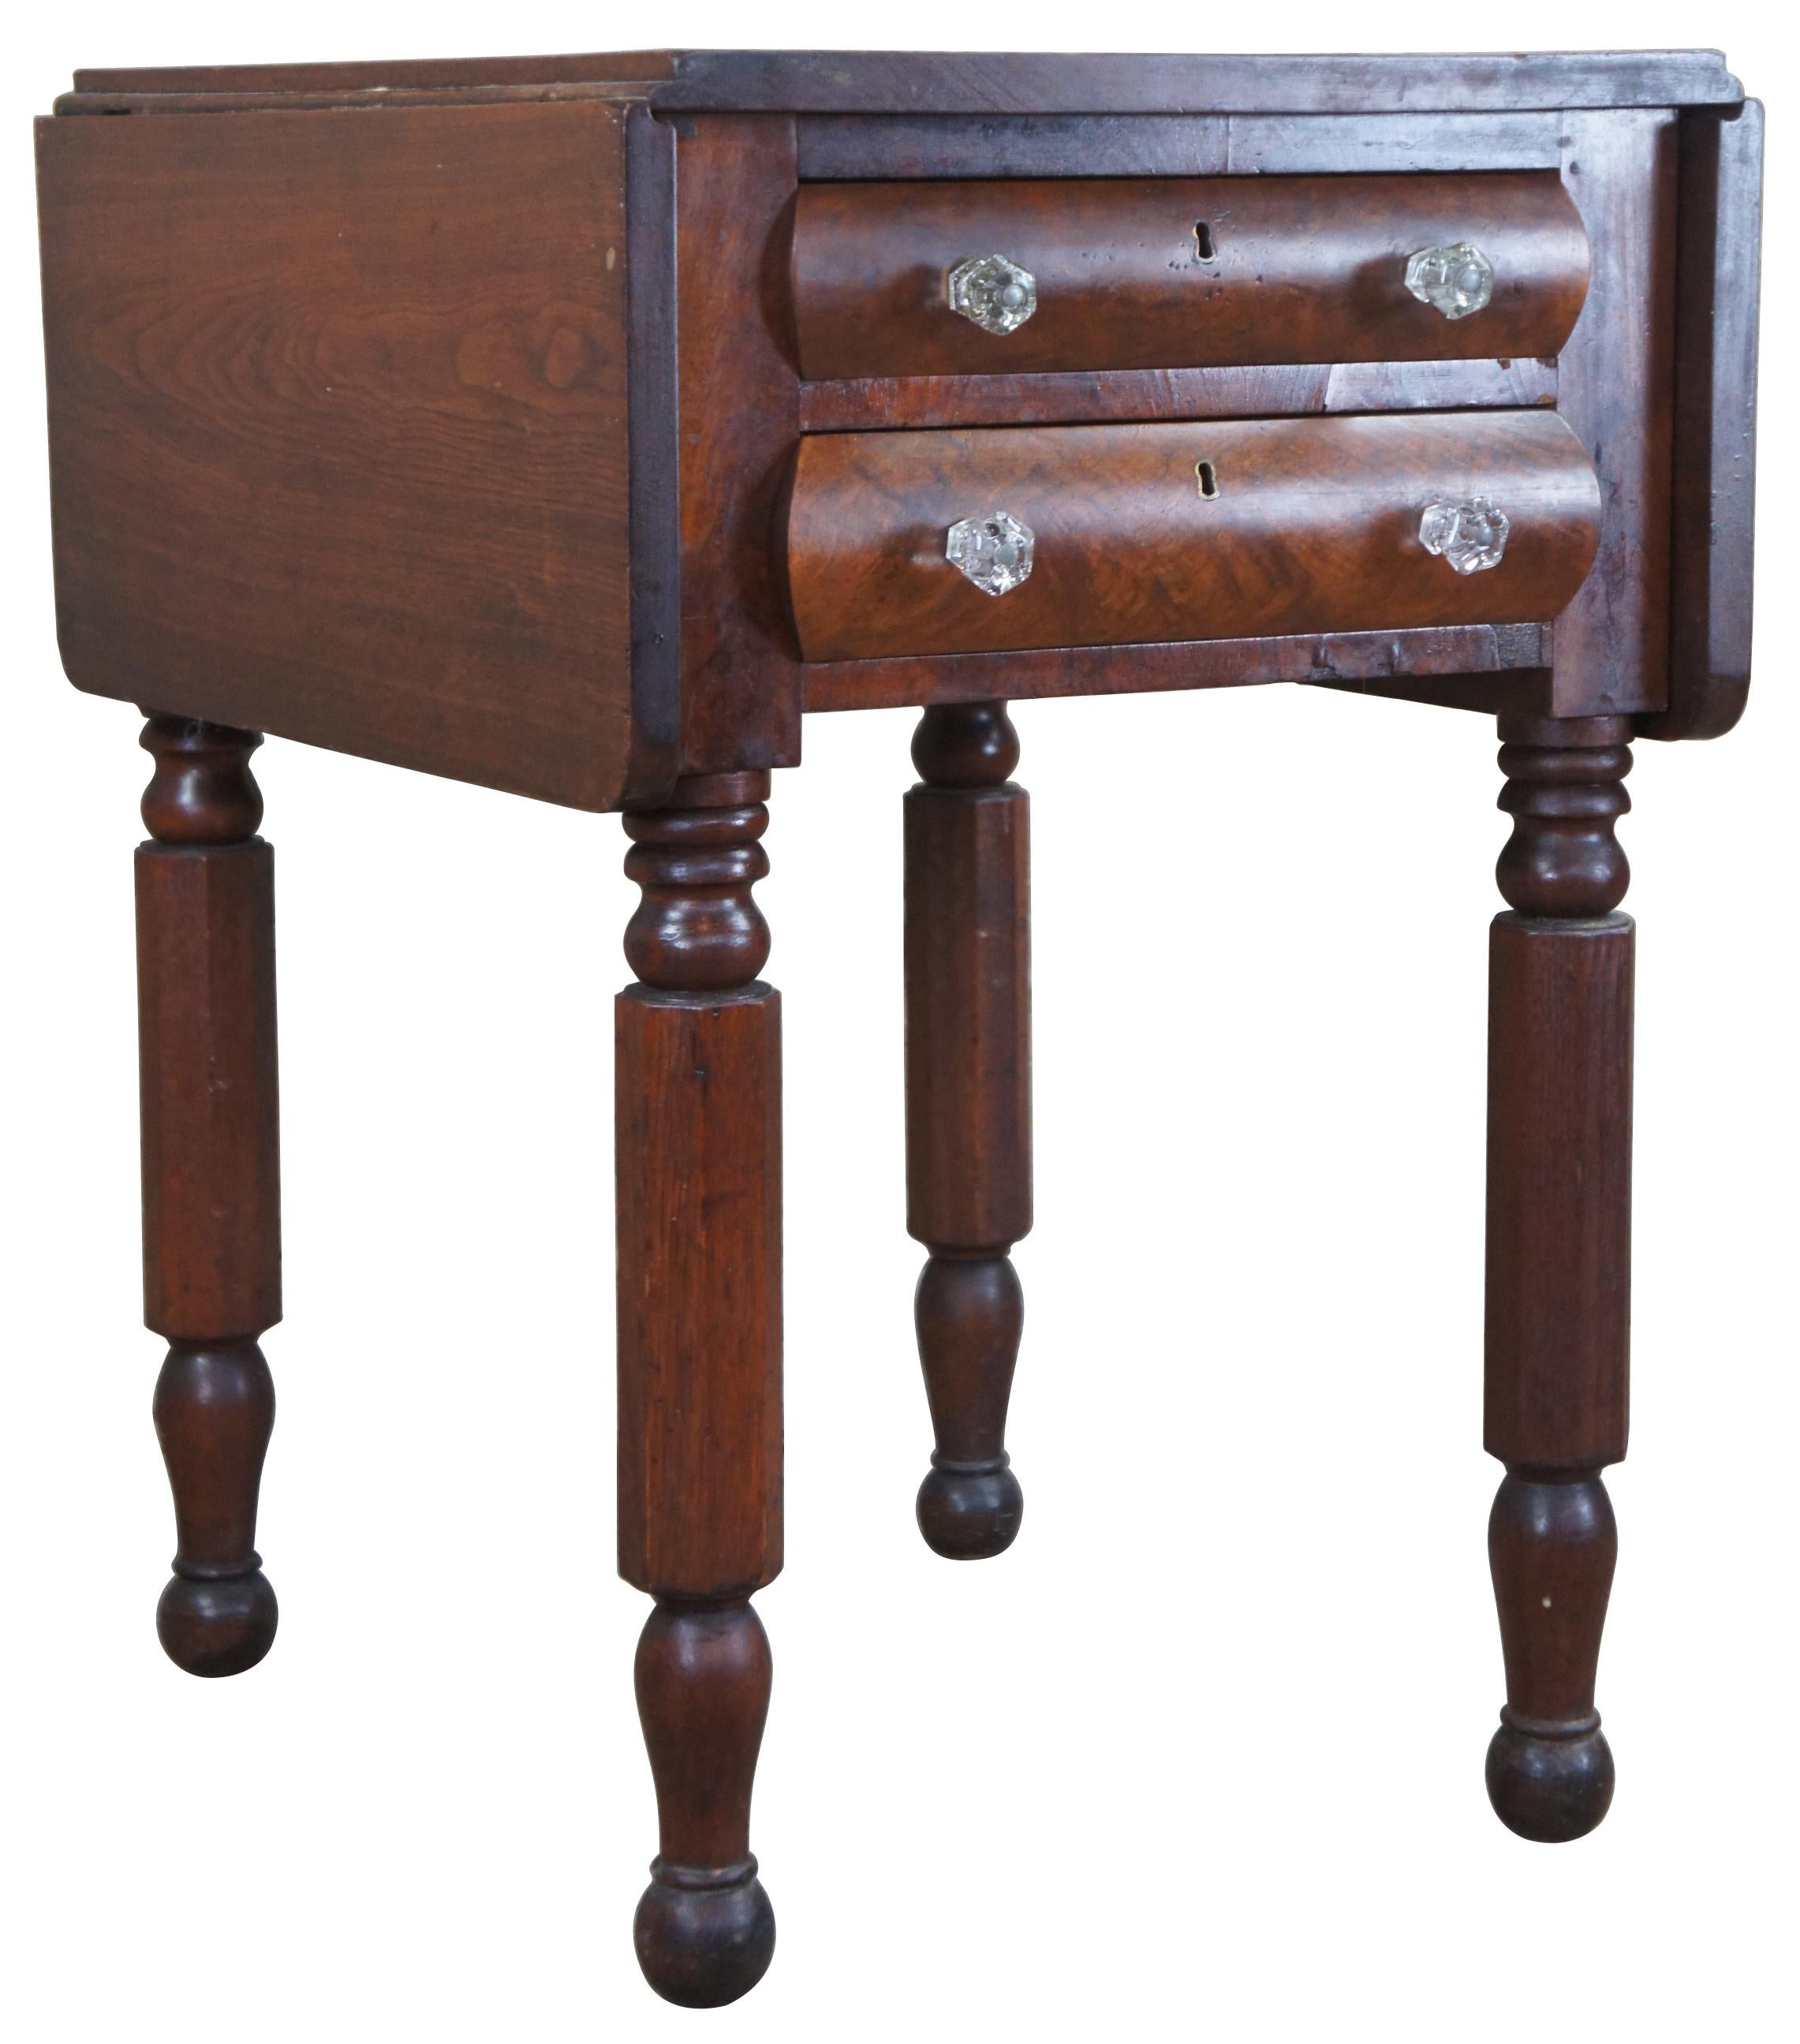 Antique American Federal drop leaf side table. Made of Mahogany featuring two drawers with glass pulls, turned legs and nubby feet.

Width of Leaves - 10